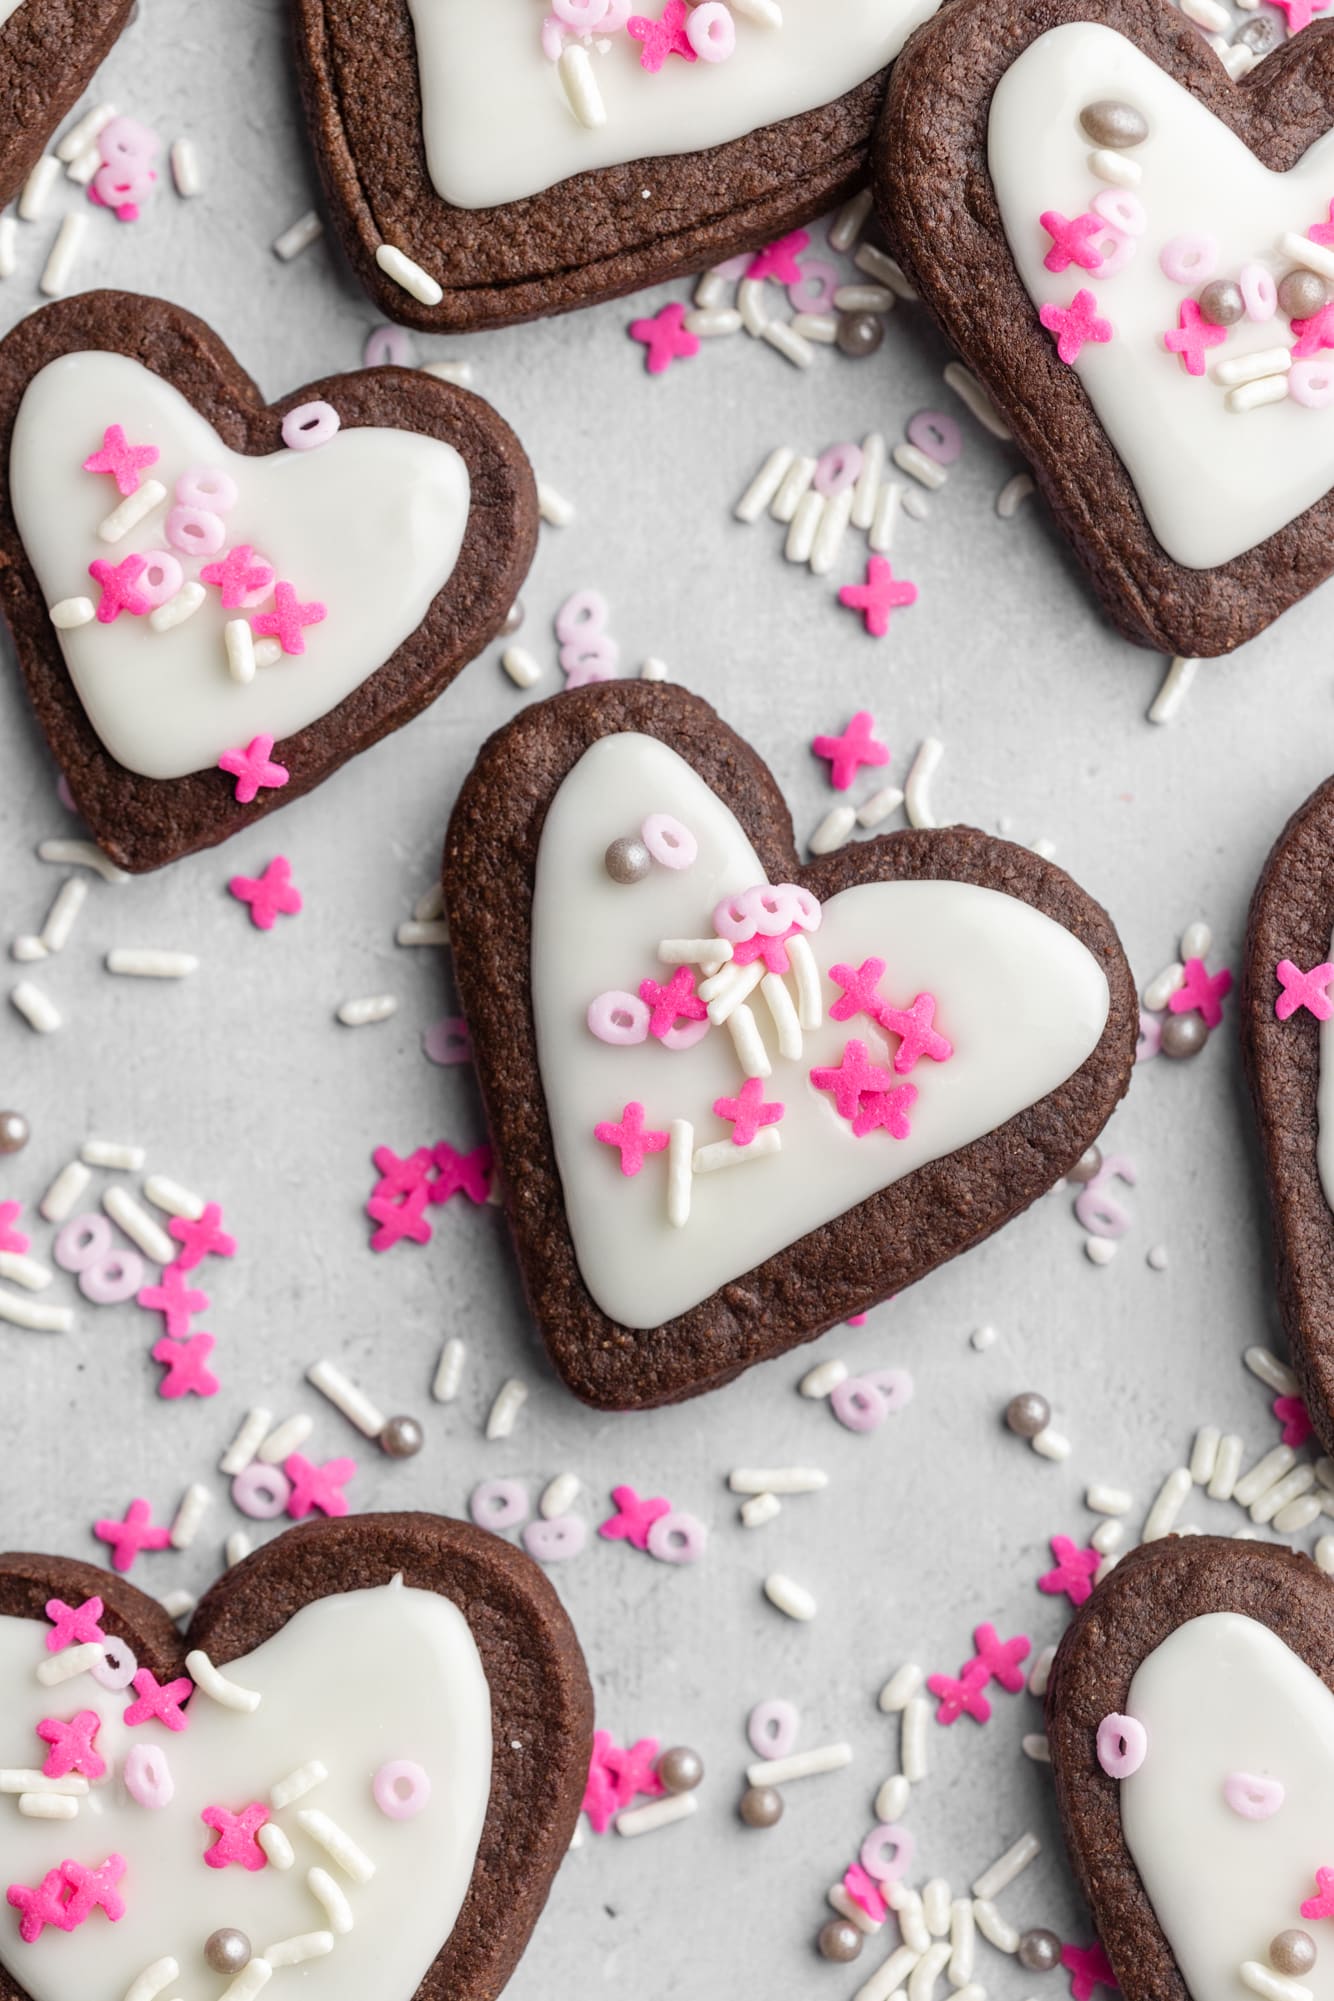 heart-shaped chocolate sugar cookies decorated with white icing and pink sprinkles.